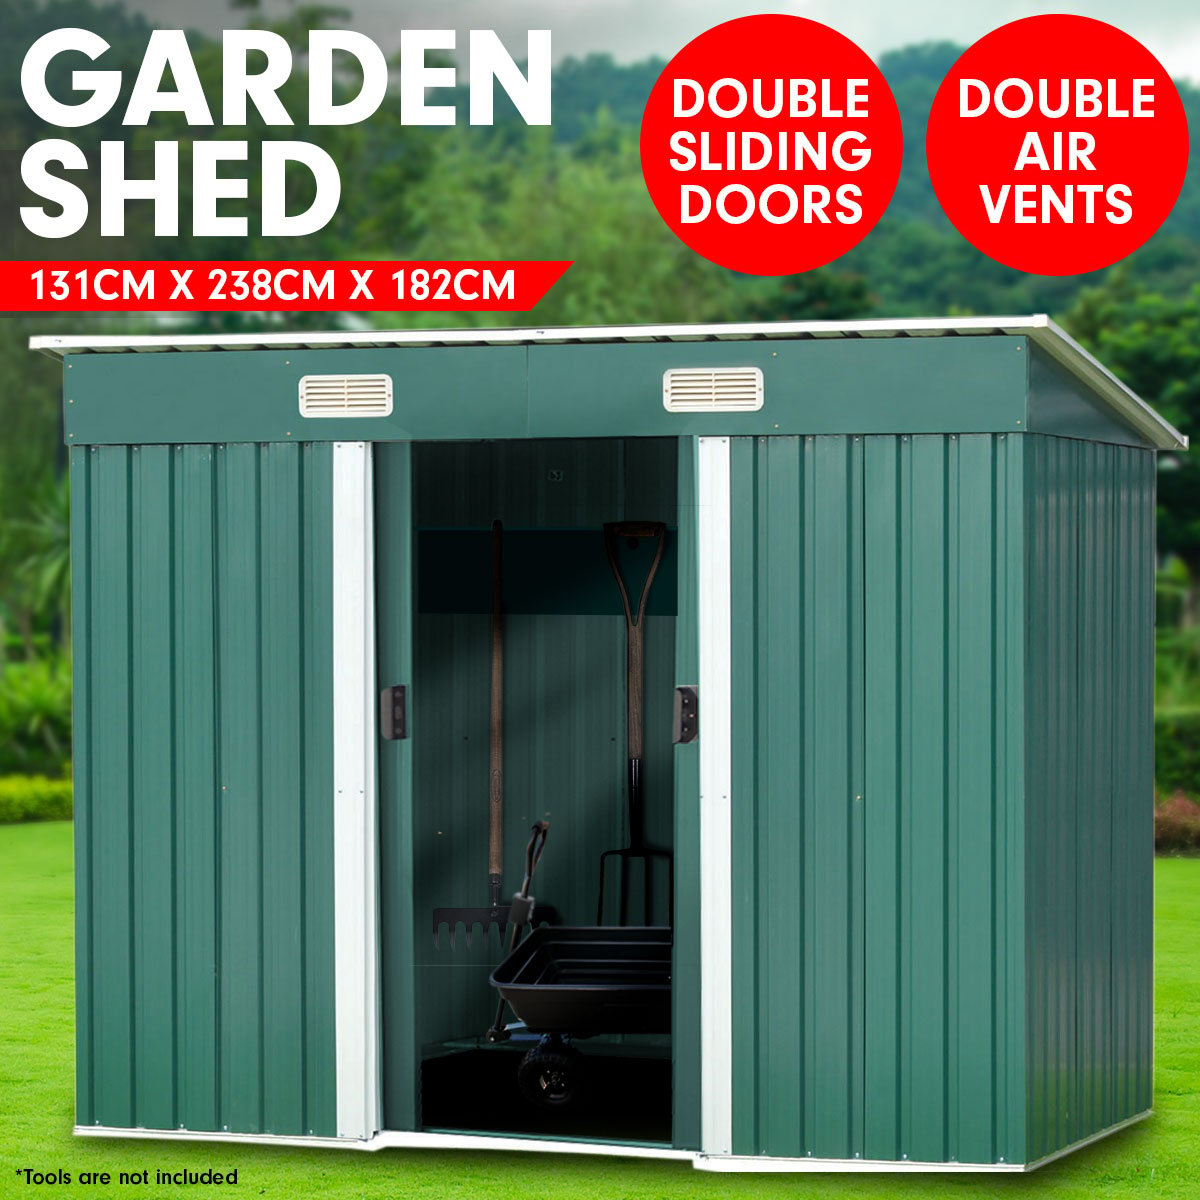 4ft x 8ft Garden Shed Flat Roof Outdoor Storage - Green 2